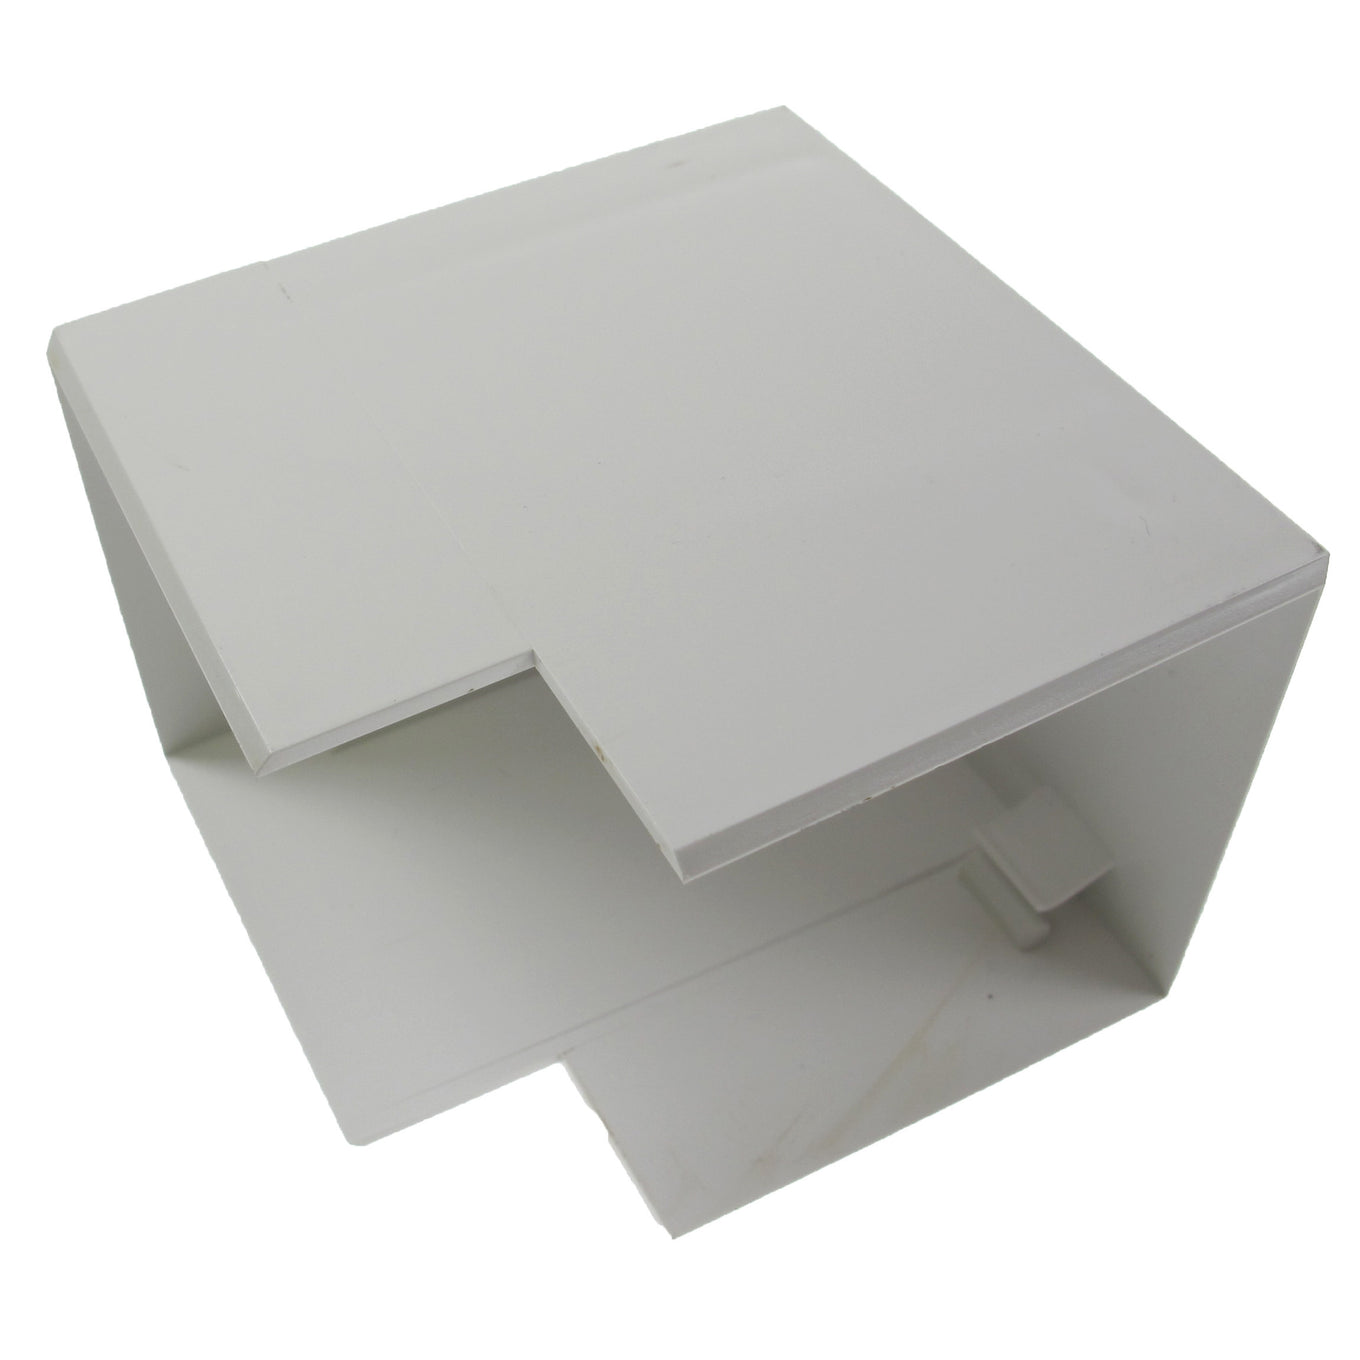 50mm x 50mm maxi square trunking